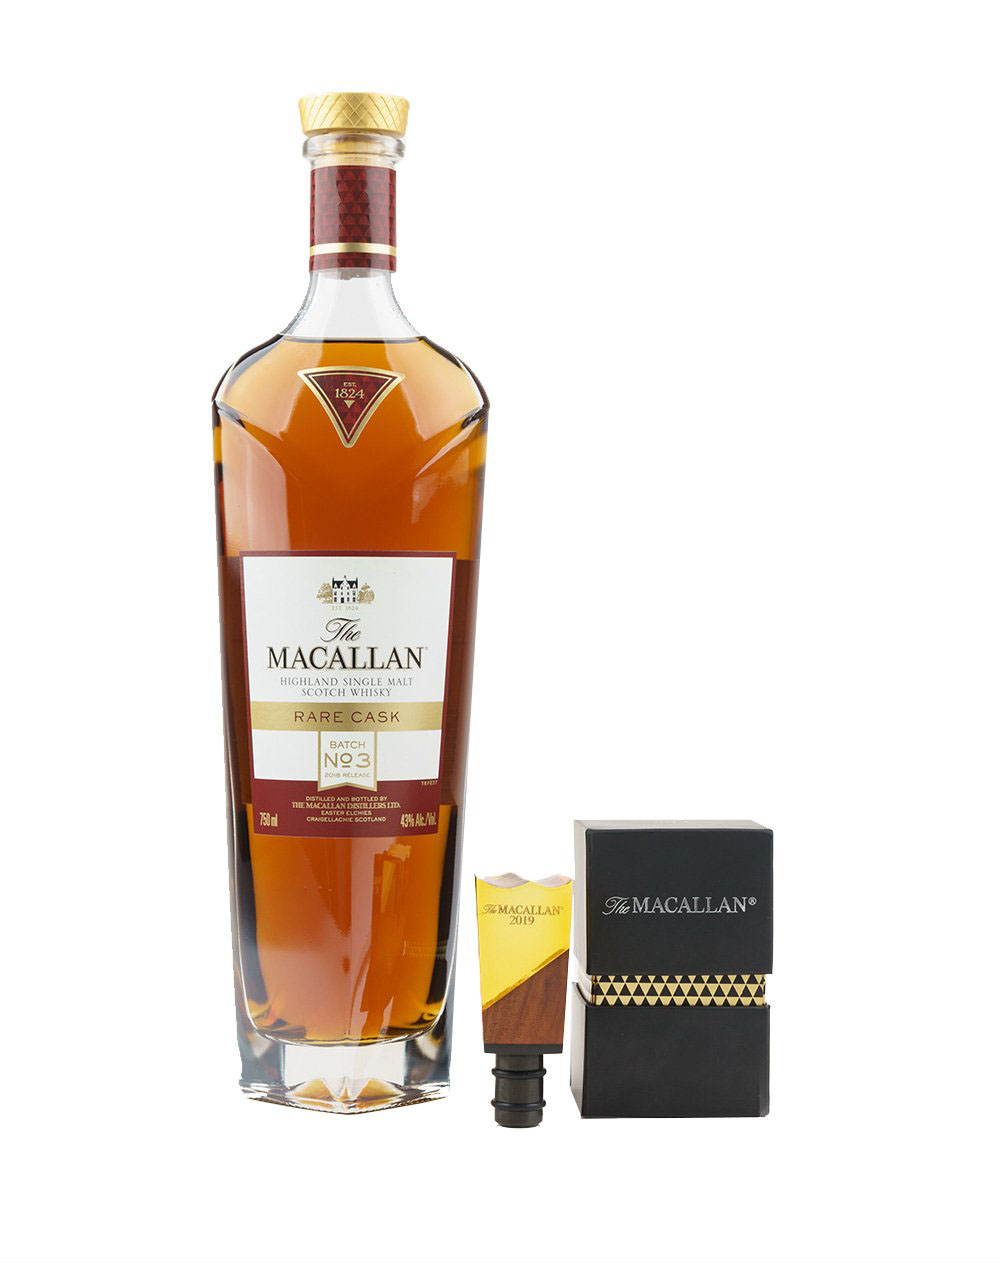 The Macallan 2019 Rare Cask with Fifth Annual Commemorative Limited Edition Bottle Stopper